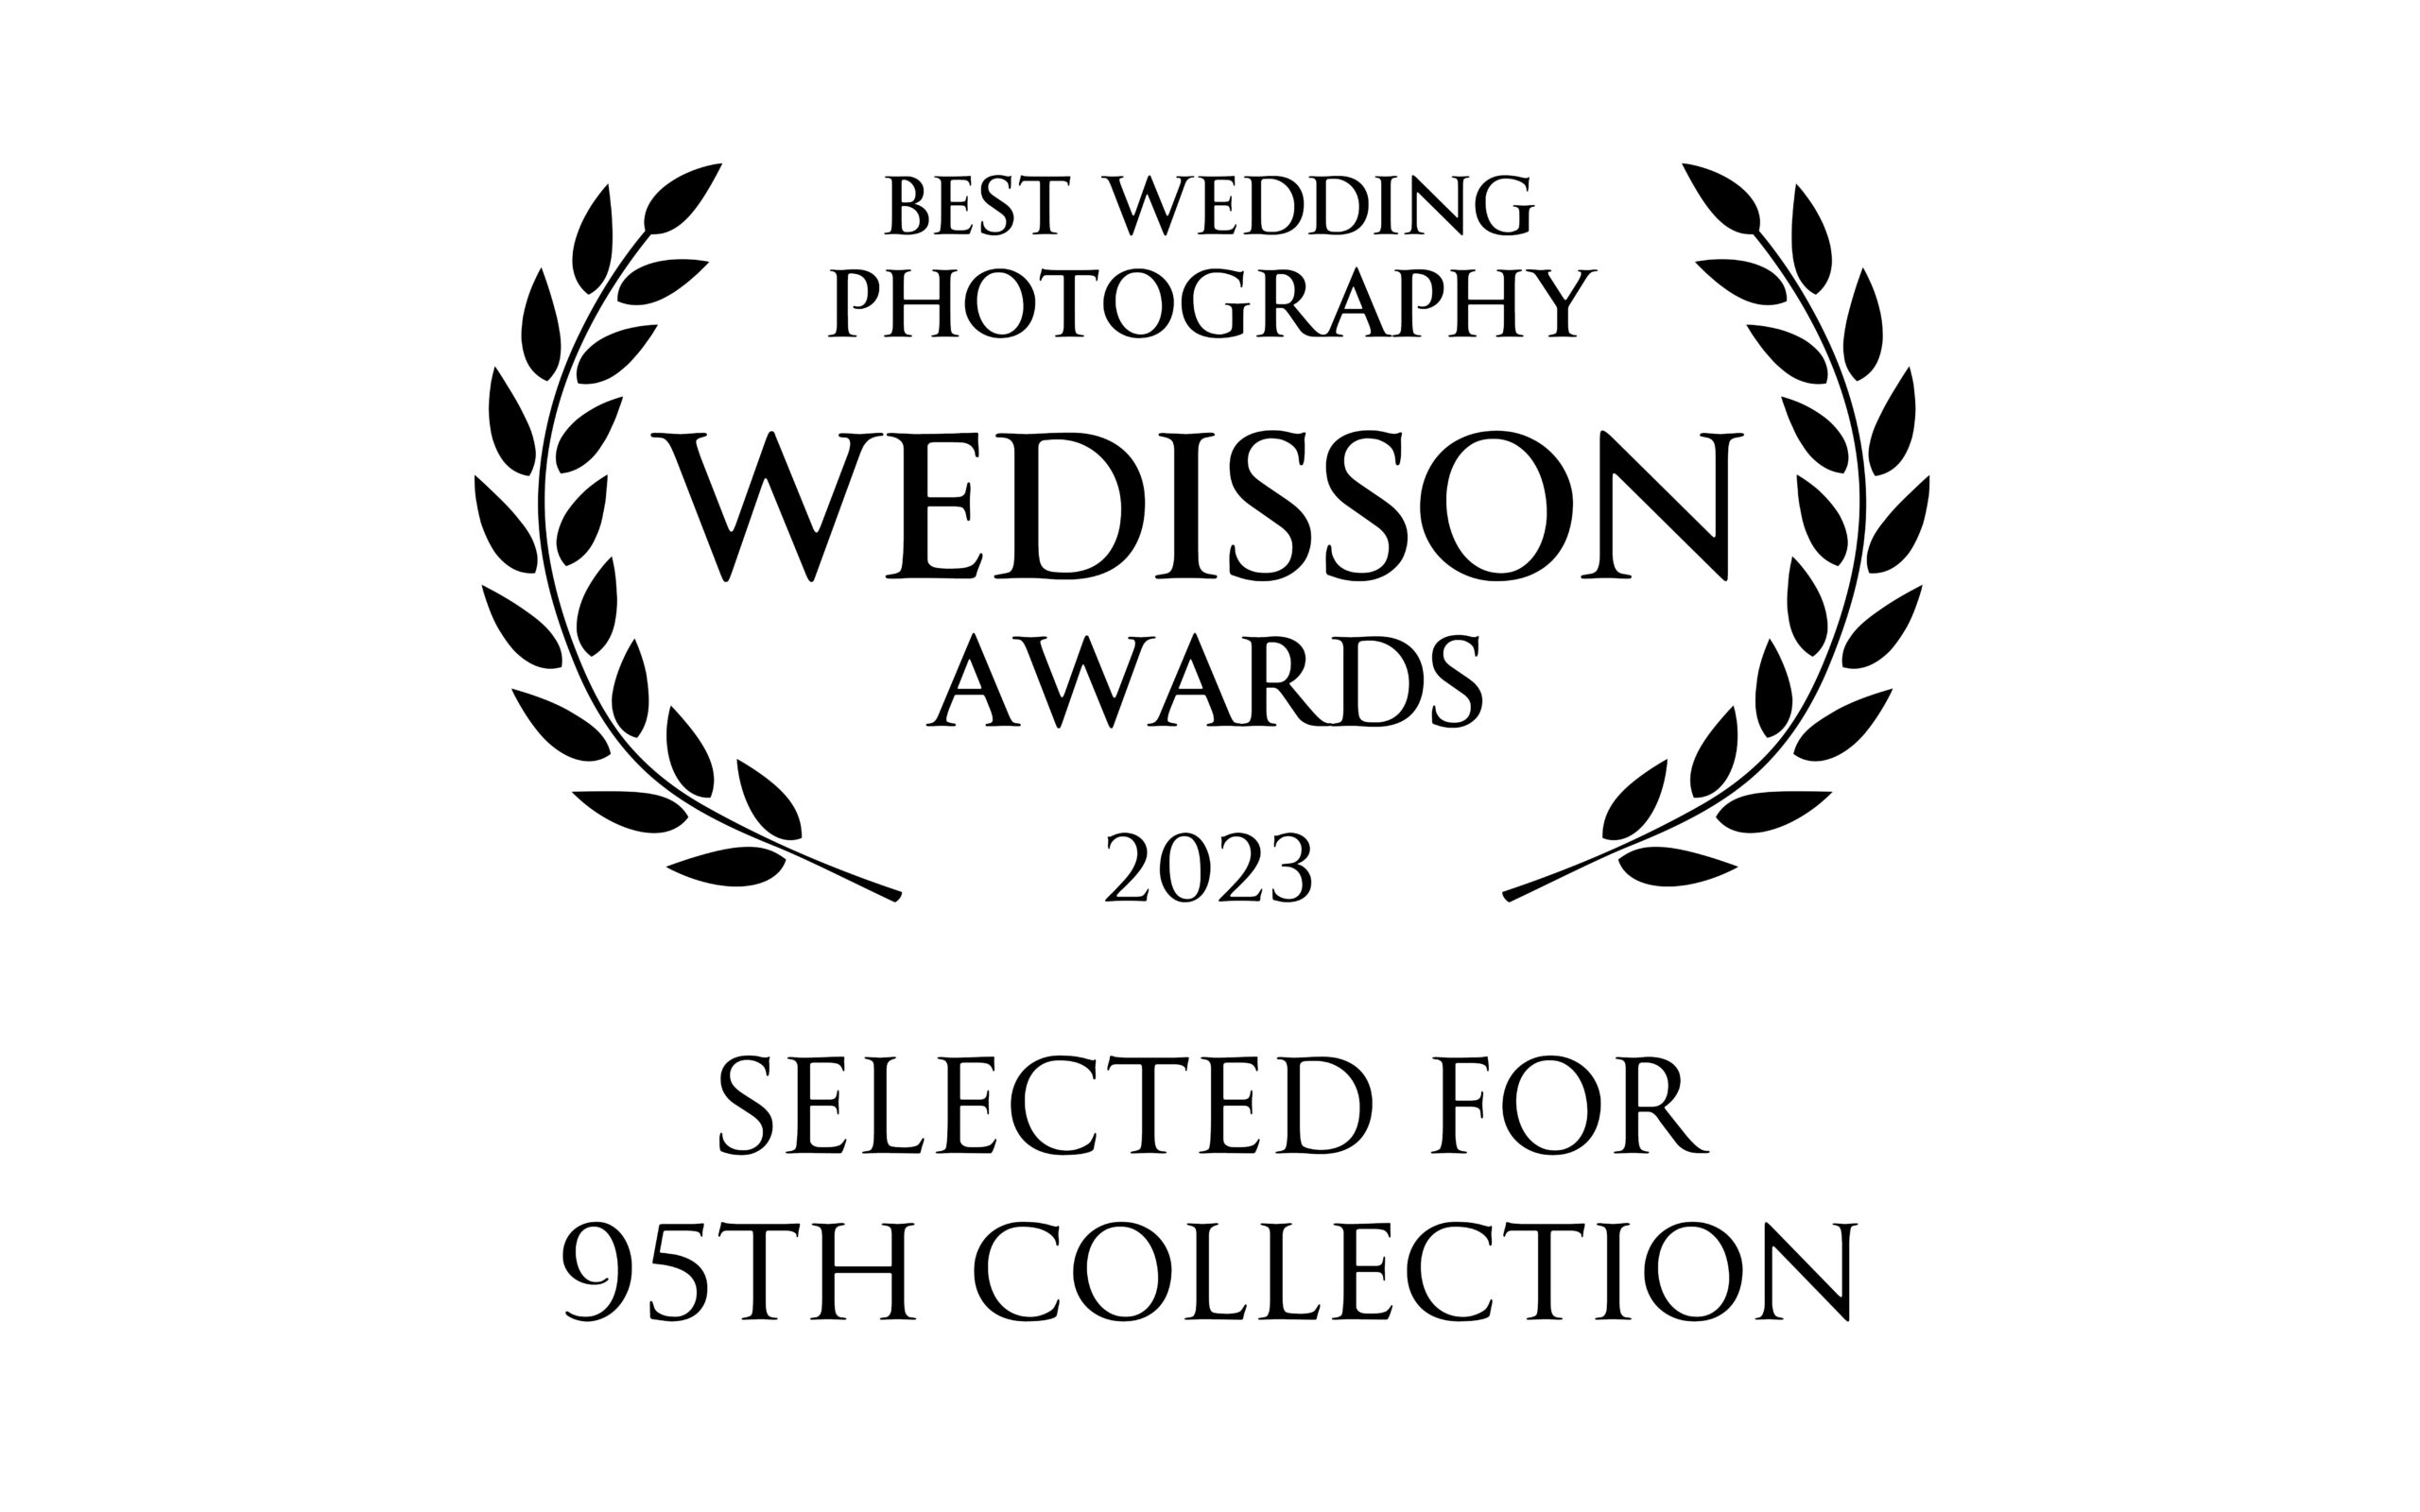 Nominated for the wedisson awards 